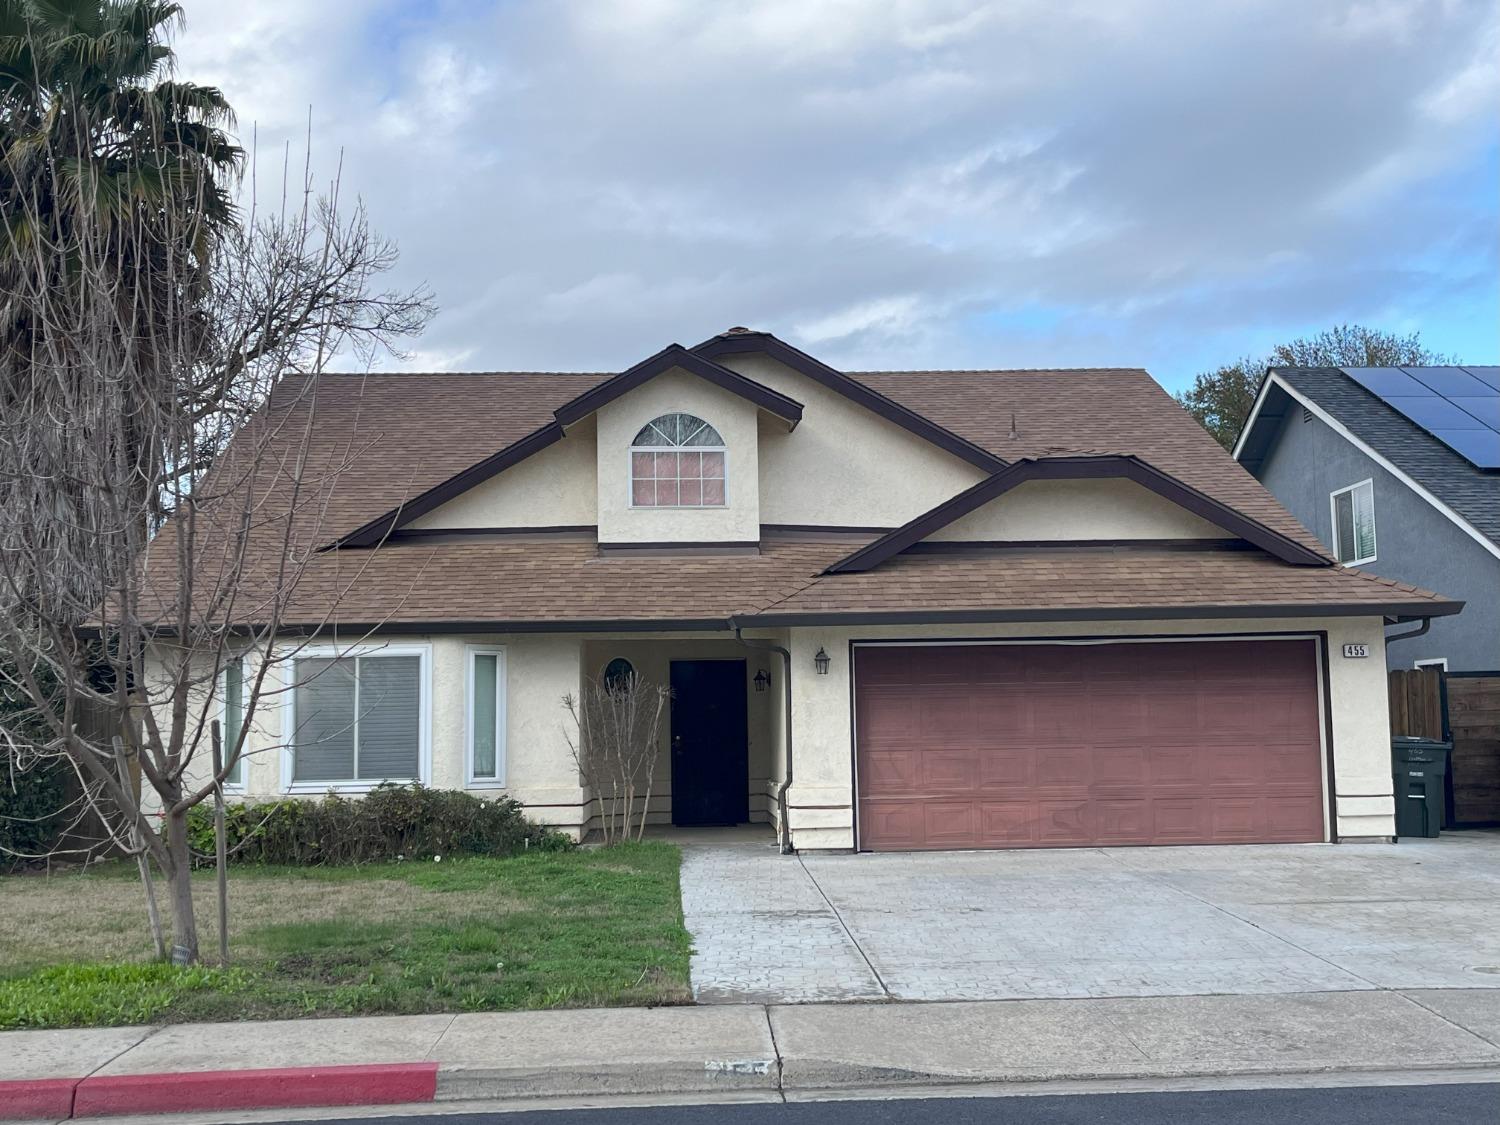 Photo of 455 D Arpino Ct in Patterson, CA